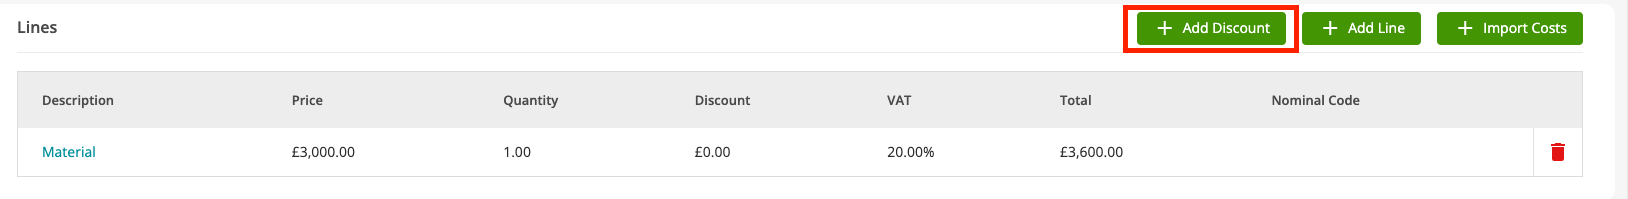 Invoice Global Discount - Add Discount Button.png